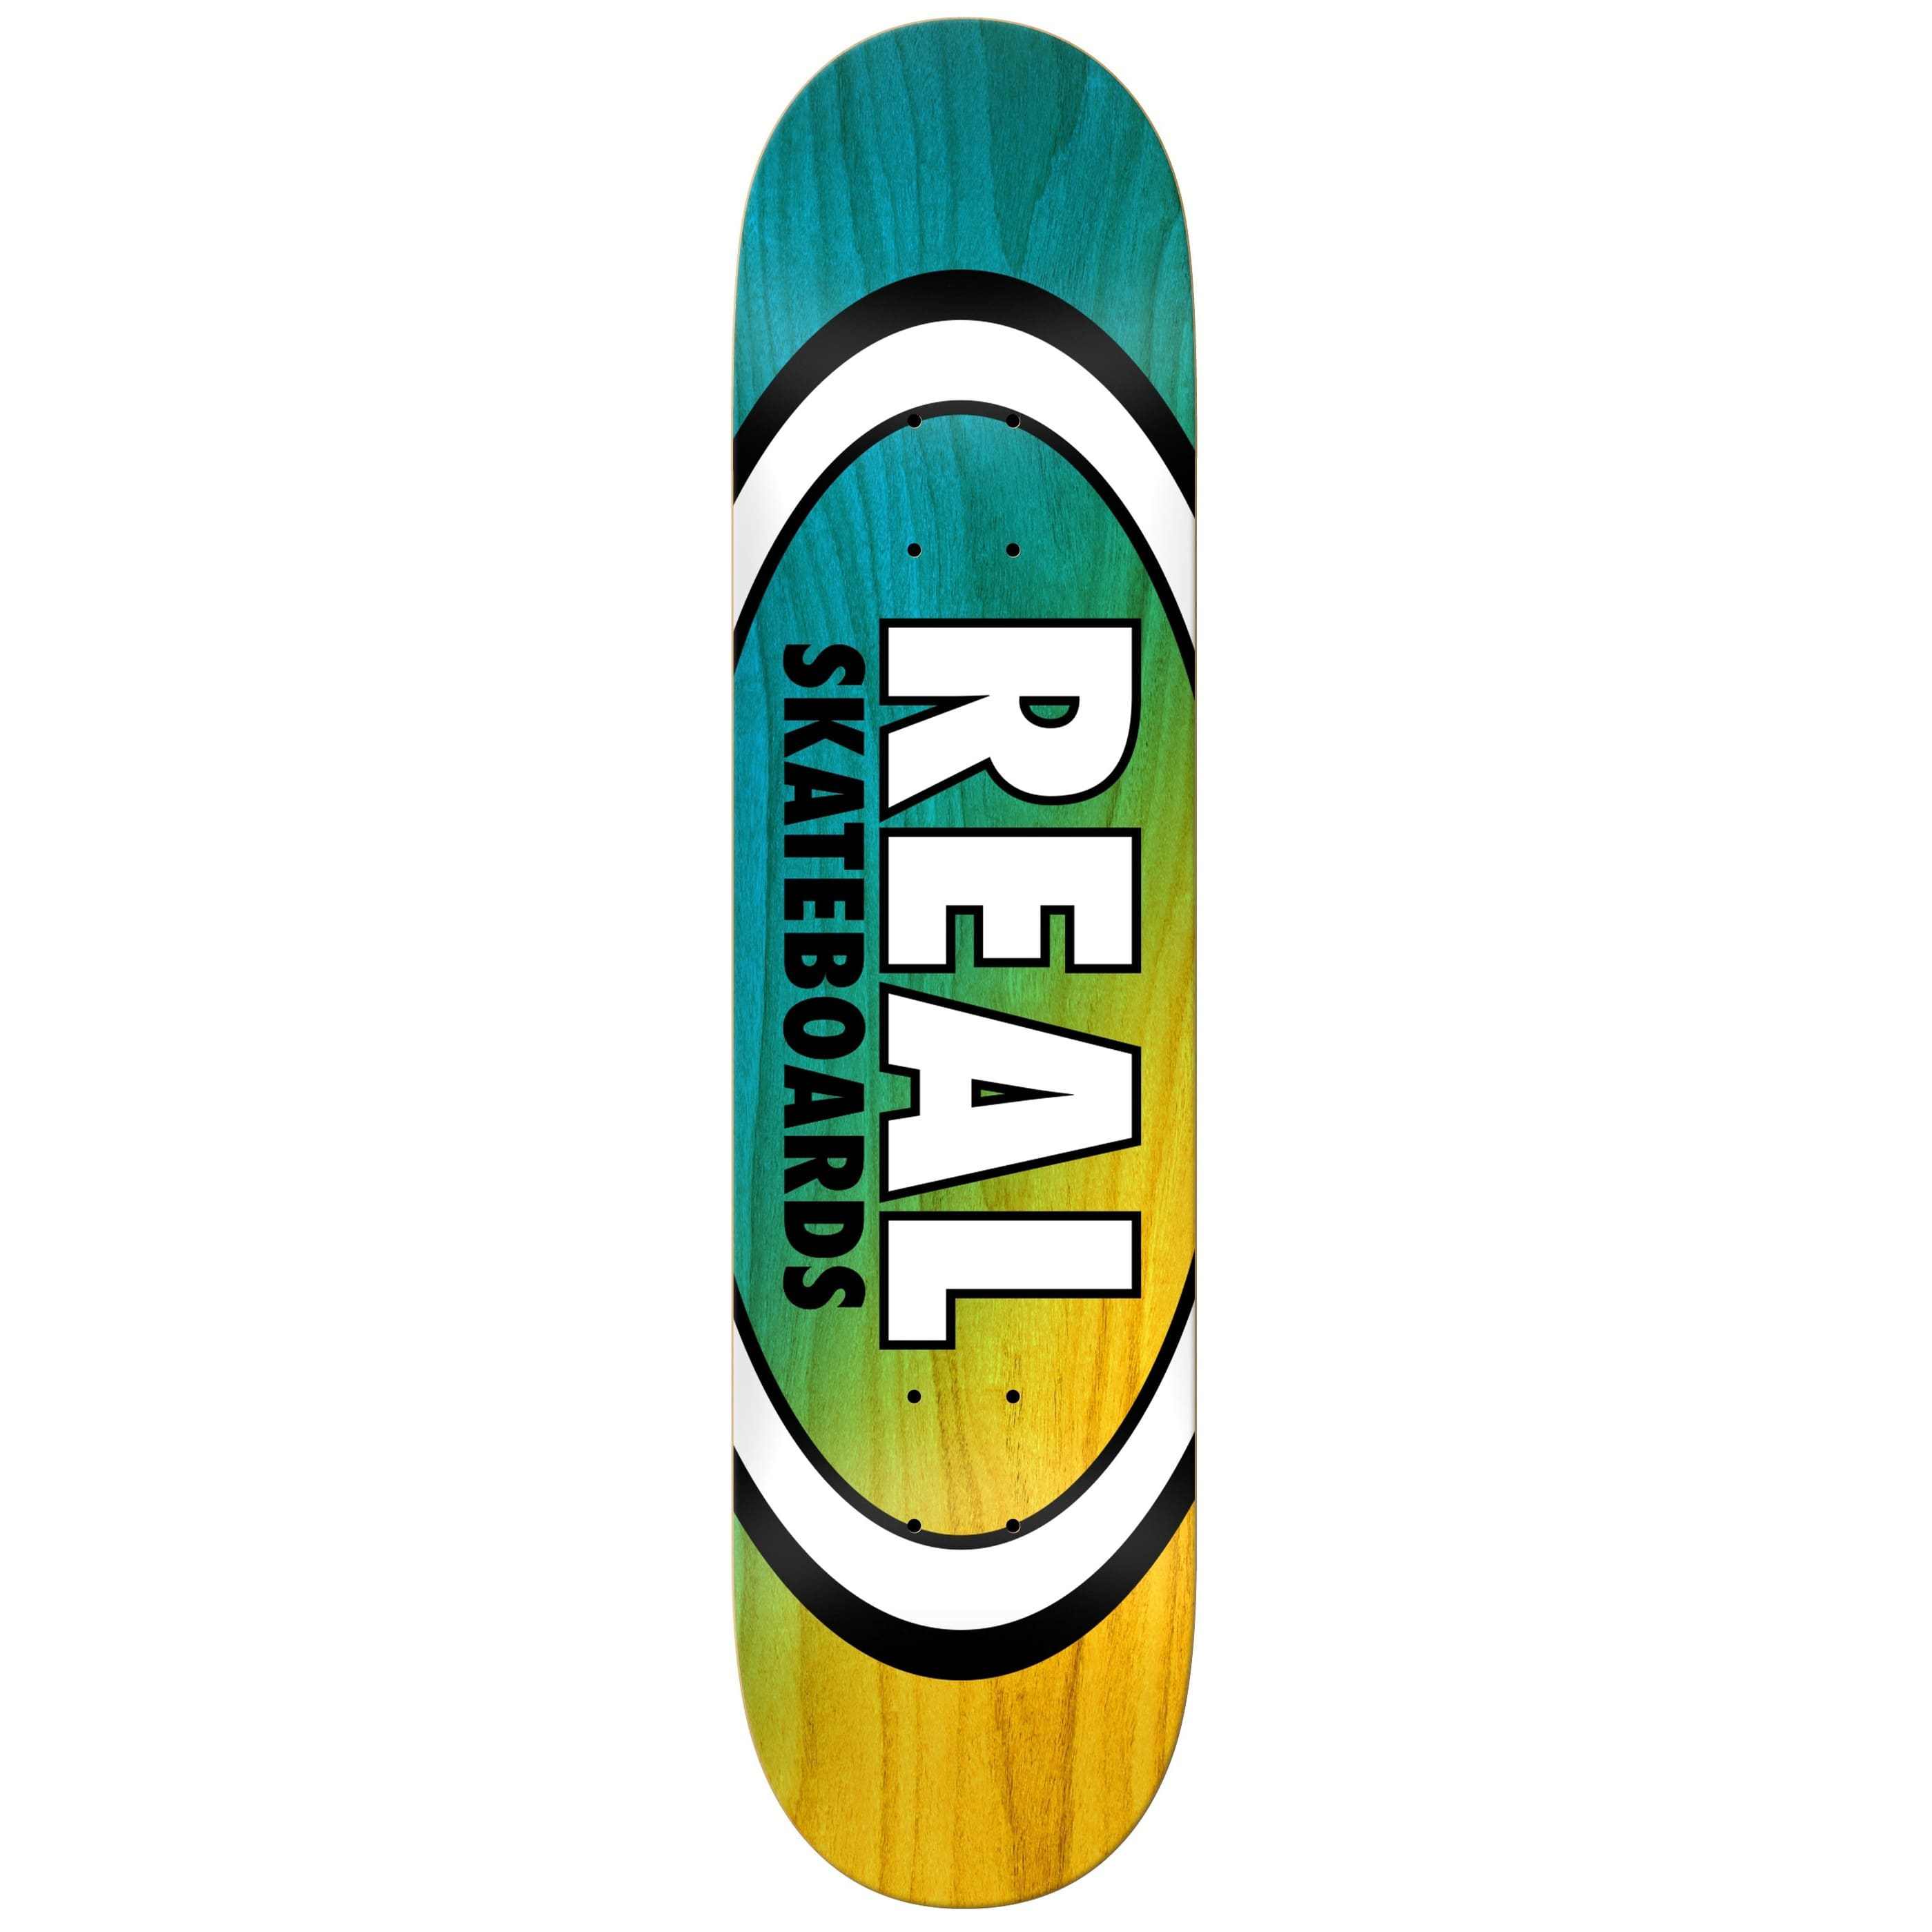 Blue and Yellow Oval Logo - Real Angle Dip Oval Blue and Yellow 8.25 Skate Deck - ATBShop.co.uk